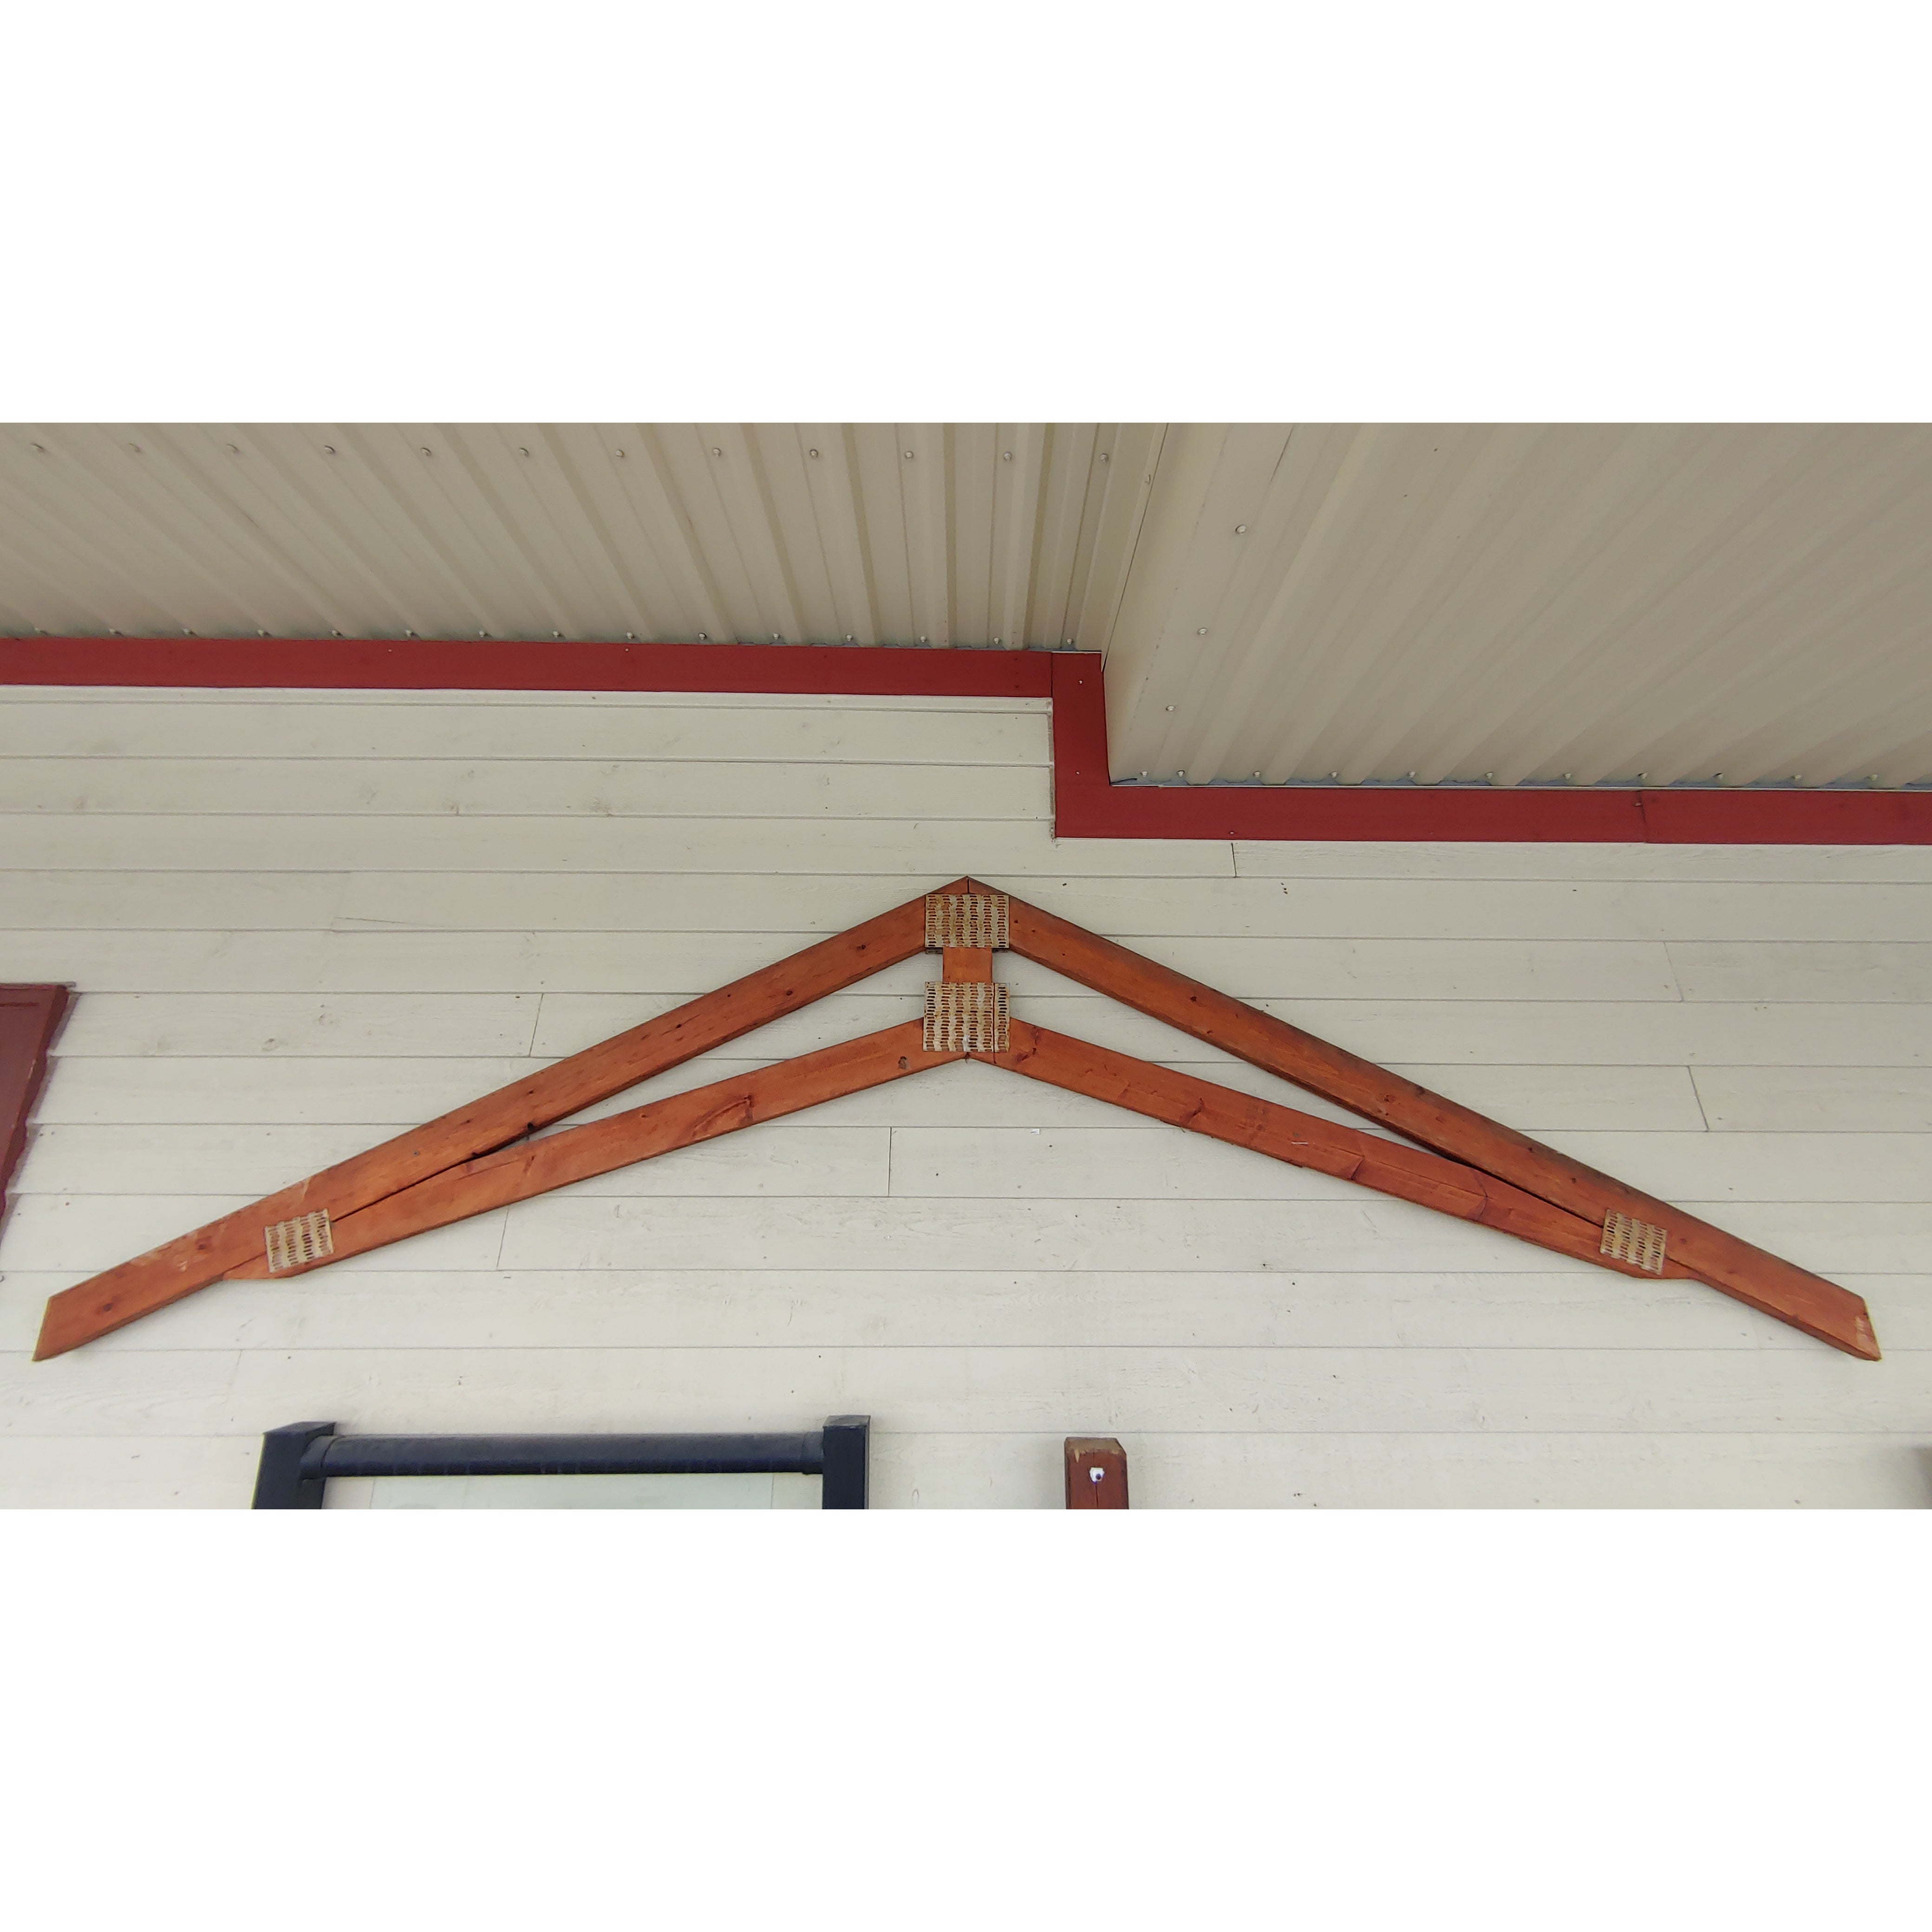 8' SHED TRUSS 6/12 PITCH